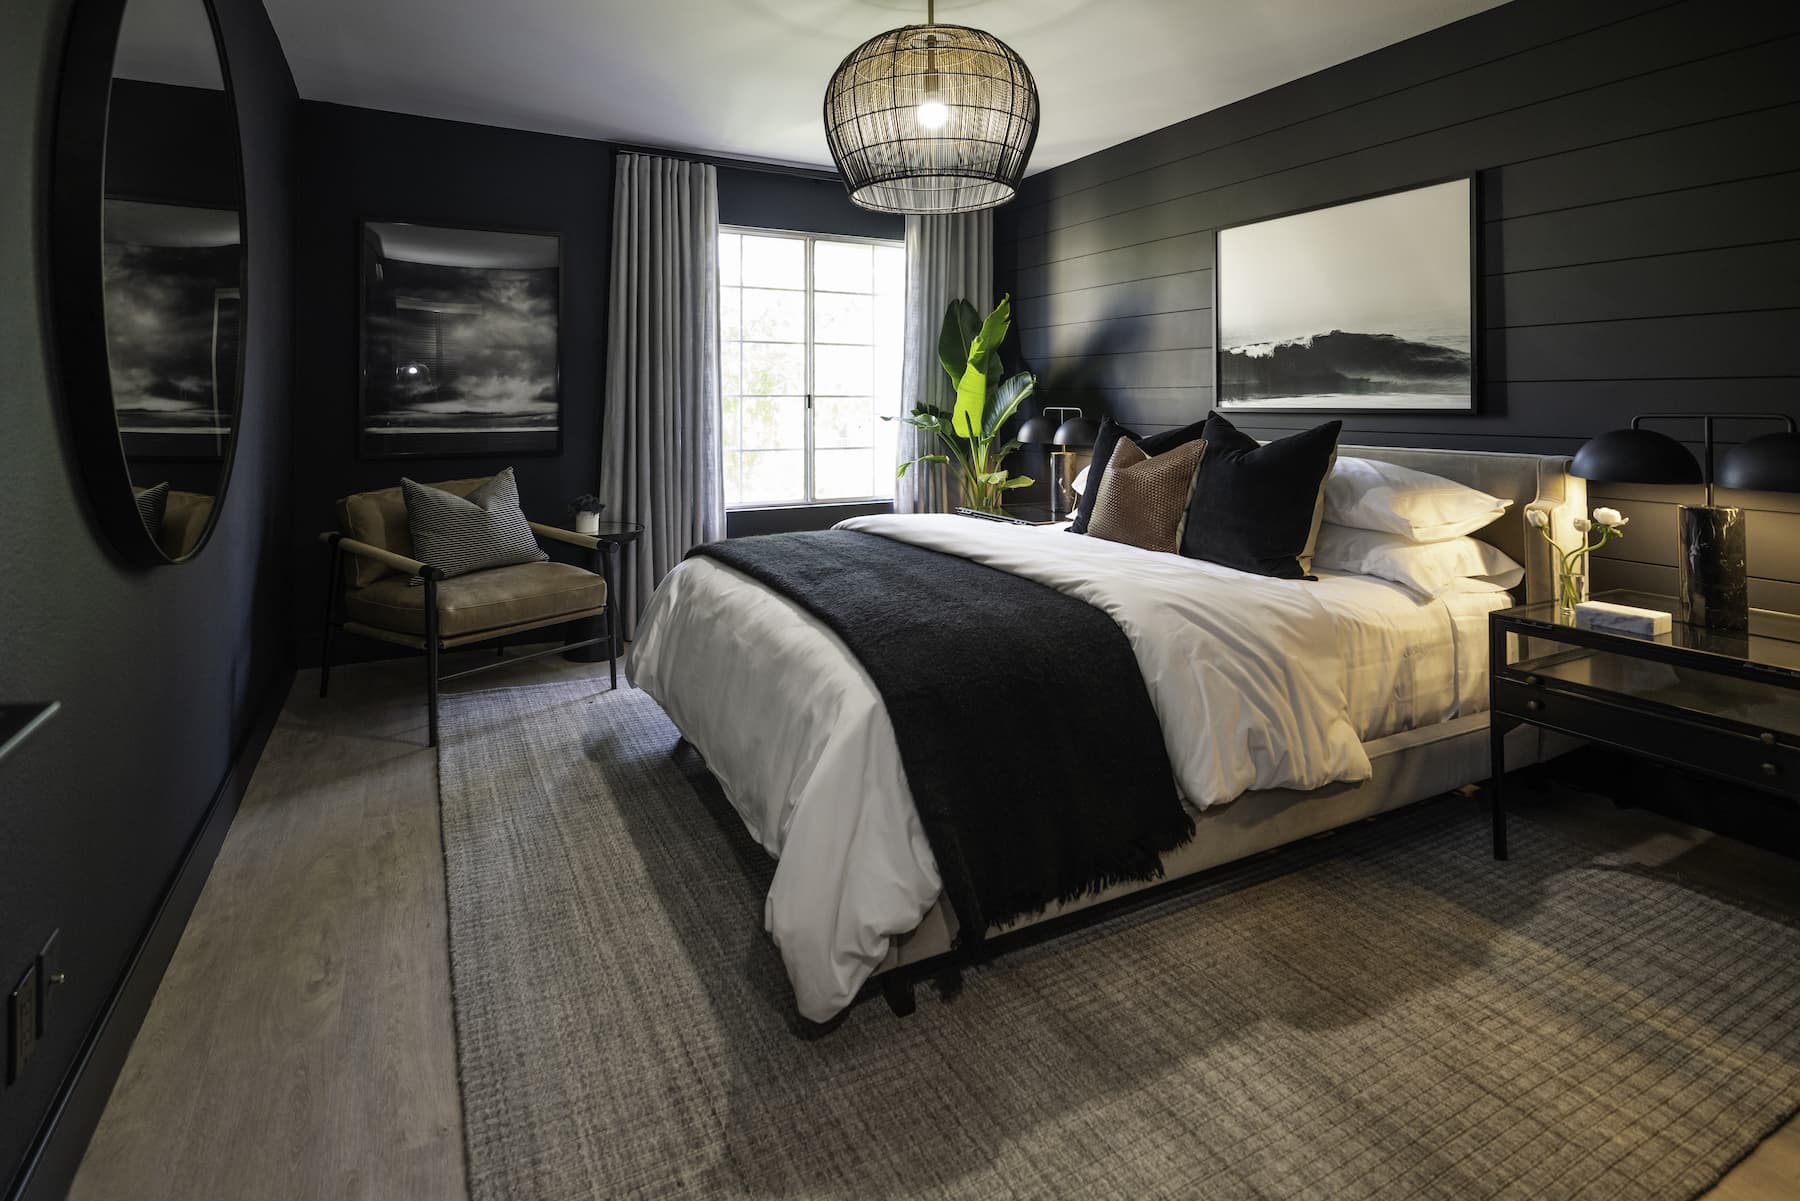 renovated bedroom with chic black and neutral color scheme